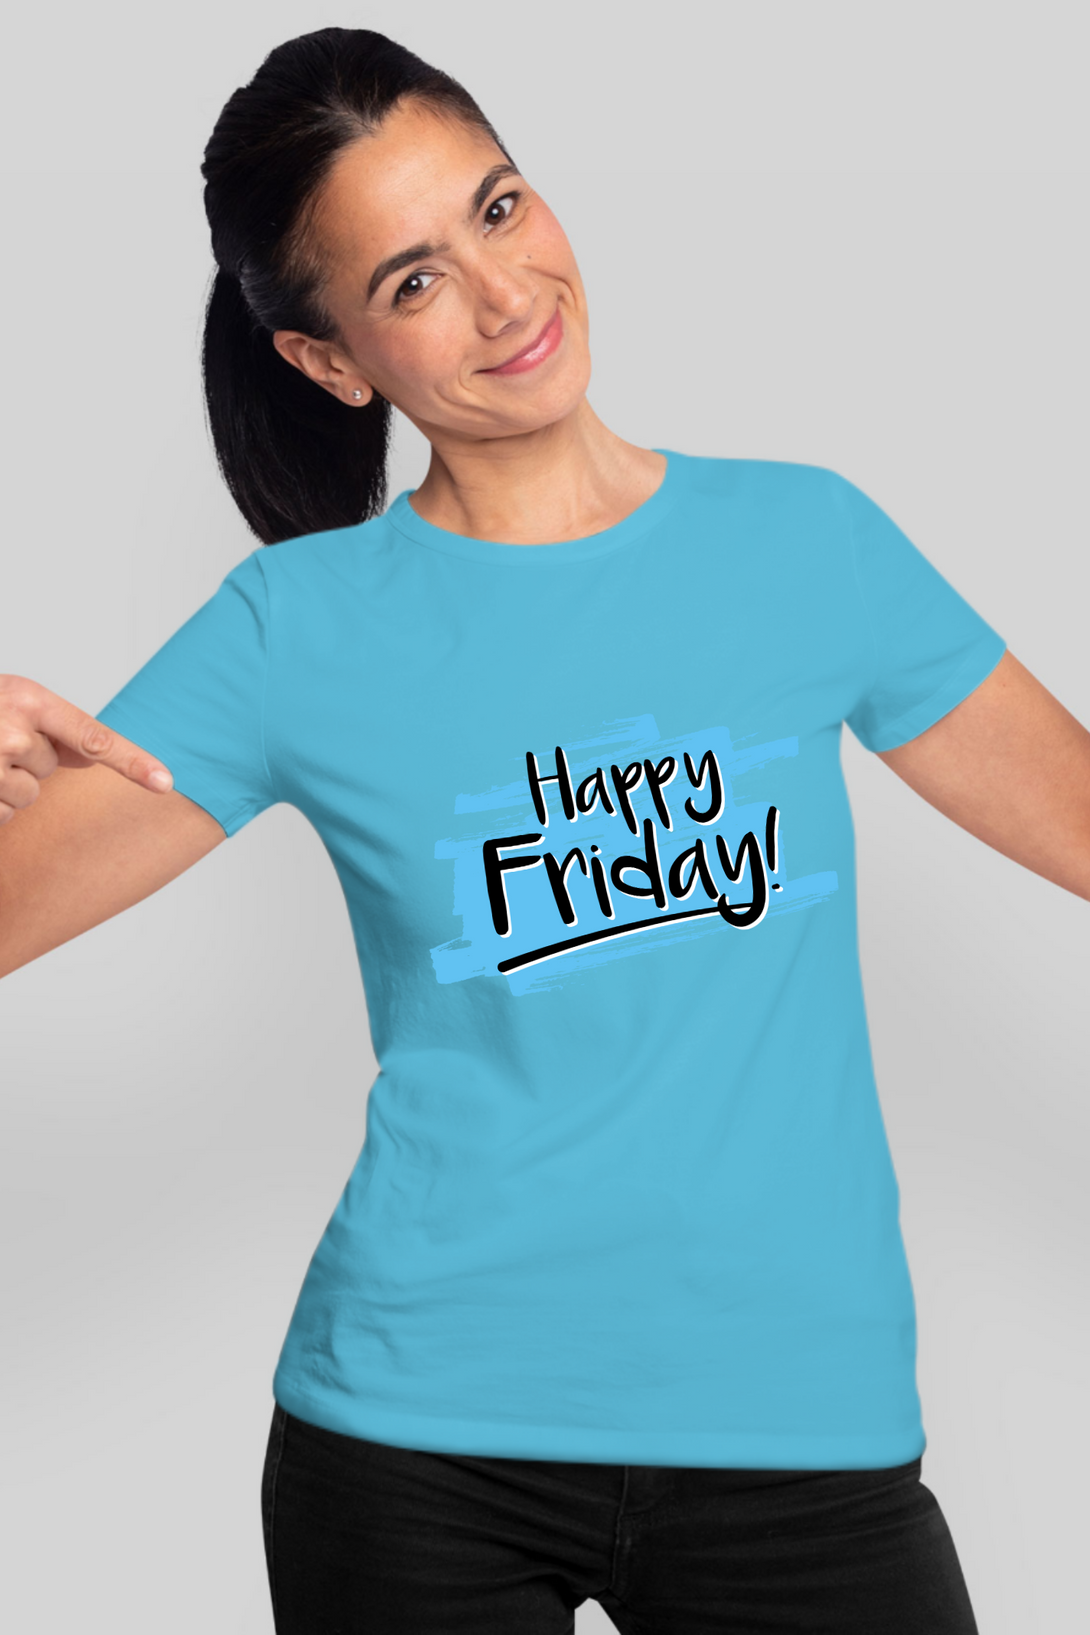 Happy Friday Printed T-Shirt For Women - WowWaves - 12